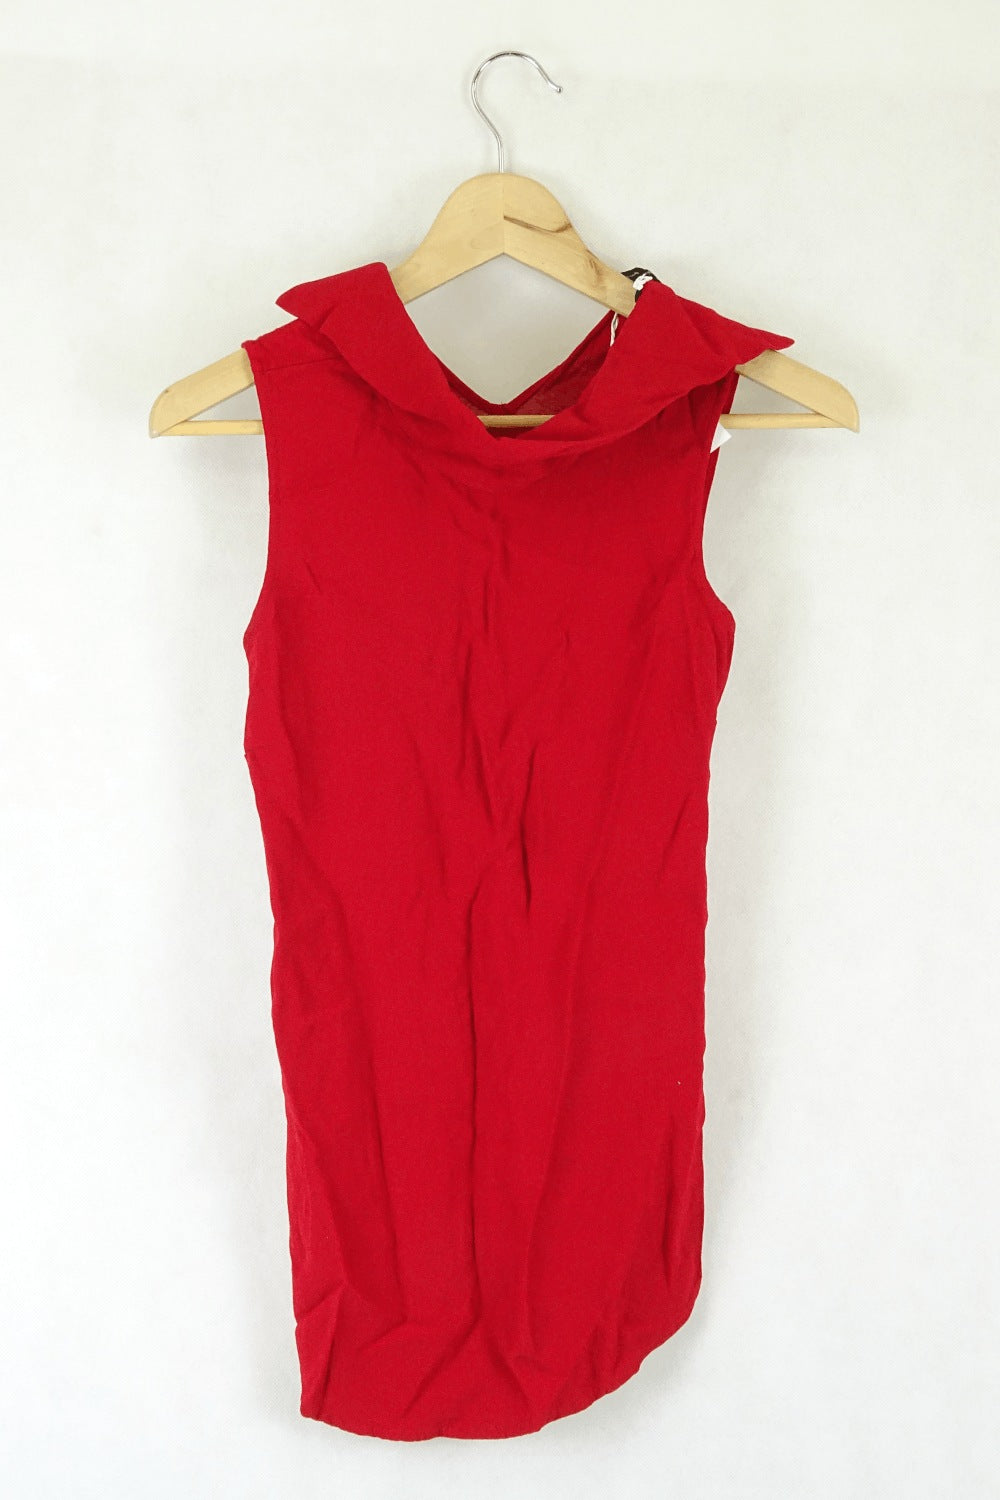 Massimo Datti Red Sleevless Top S